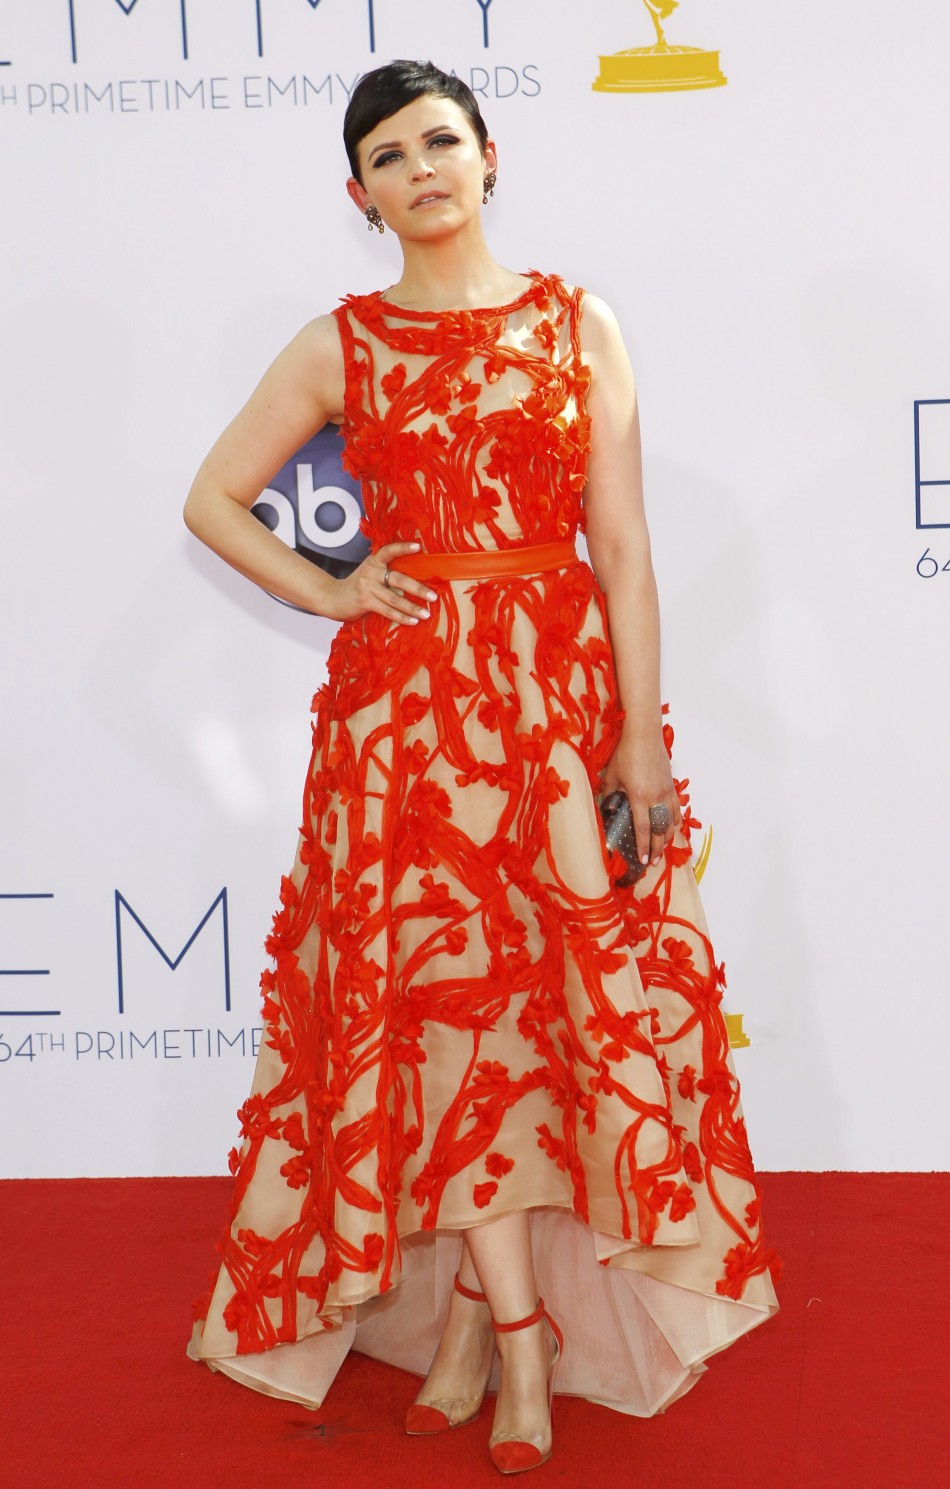 Actress Ginnifer Goodwin, of the drama series Once Upon A Time, arrives at the 64th Primetime Emmy Awards in Los Angeles